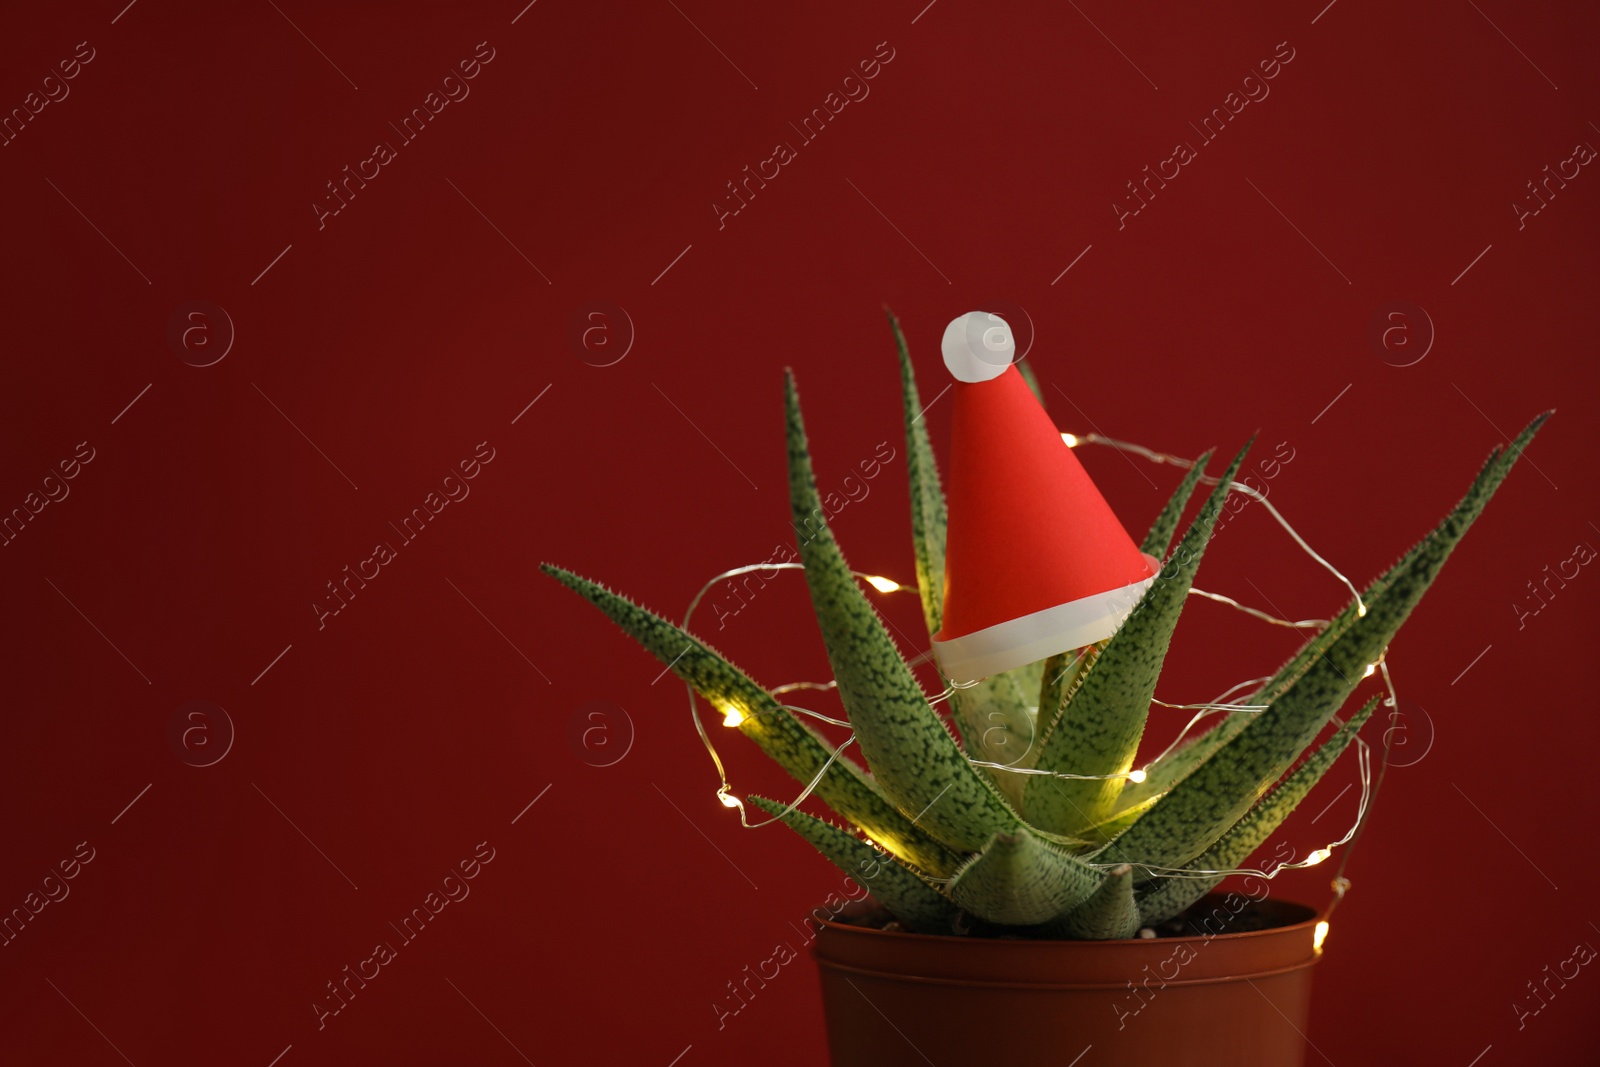 Photo of Cactus decorated with glowing fairy lights and santa hat on red background. Space for text